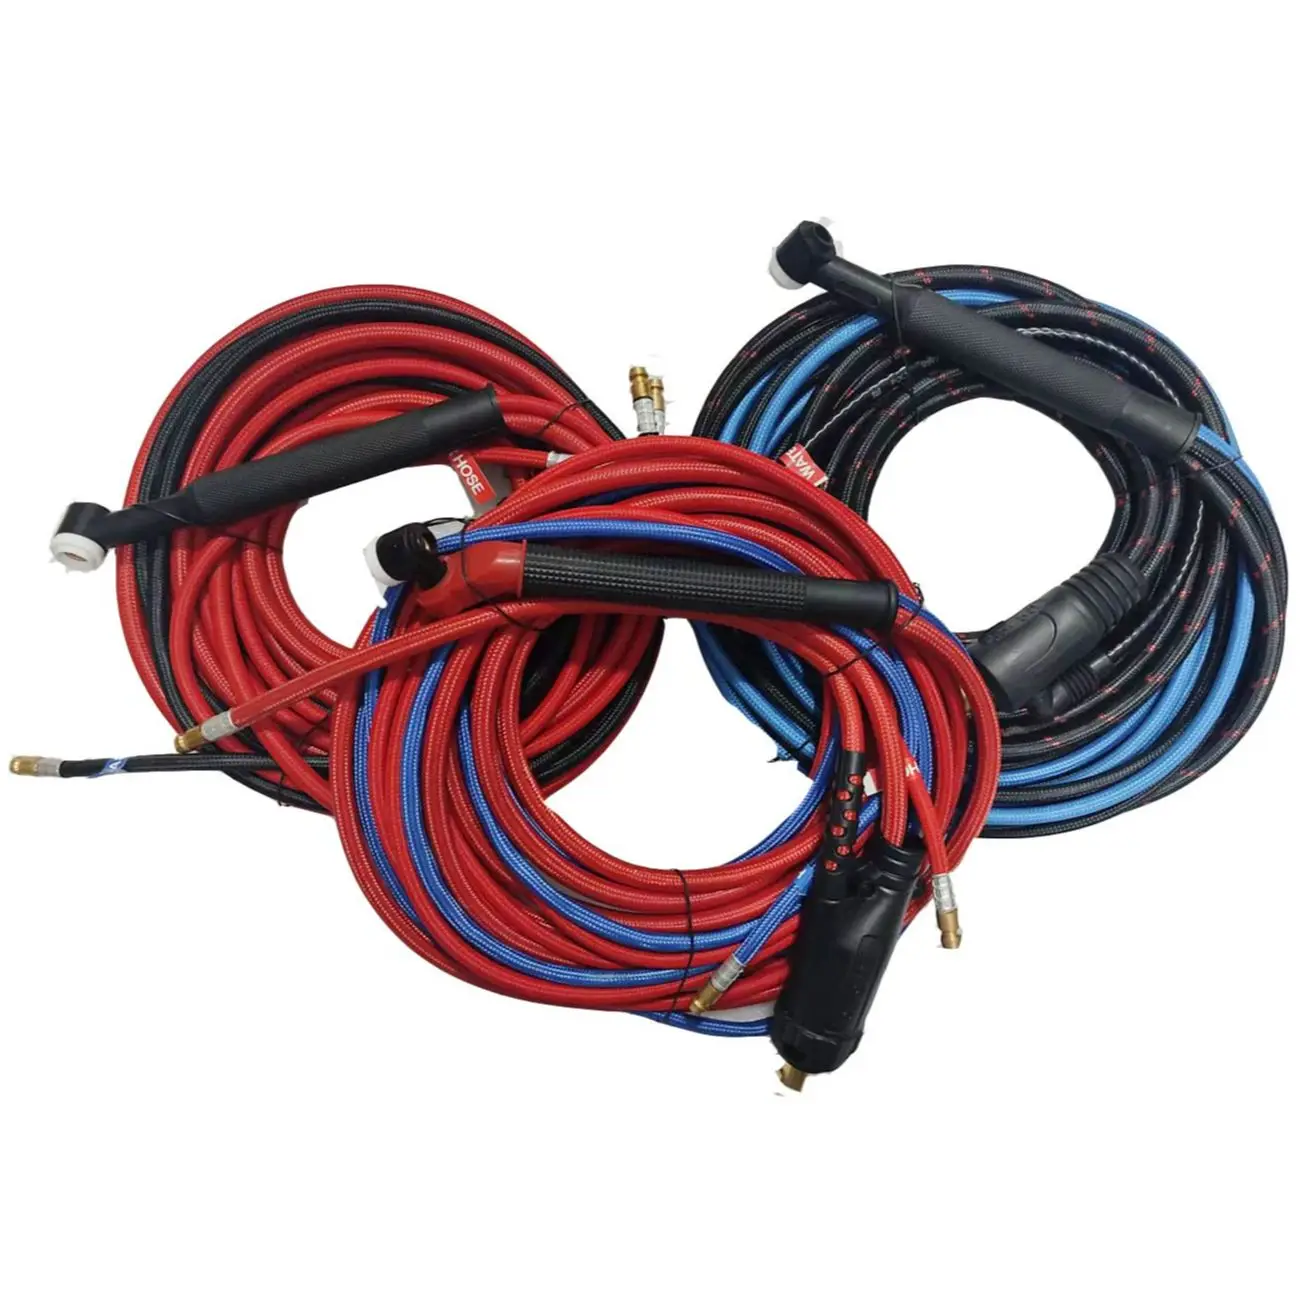 wp20-nr20-wp20f-4m-tig-welding-gun-torch-water-cooled-soft-cable-hose-35-70-connector